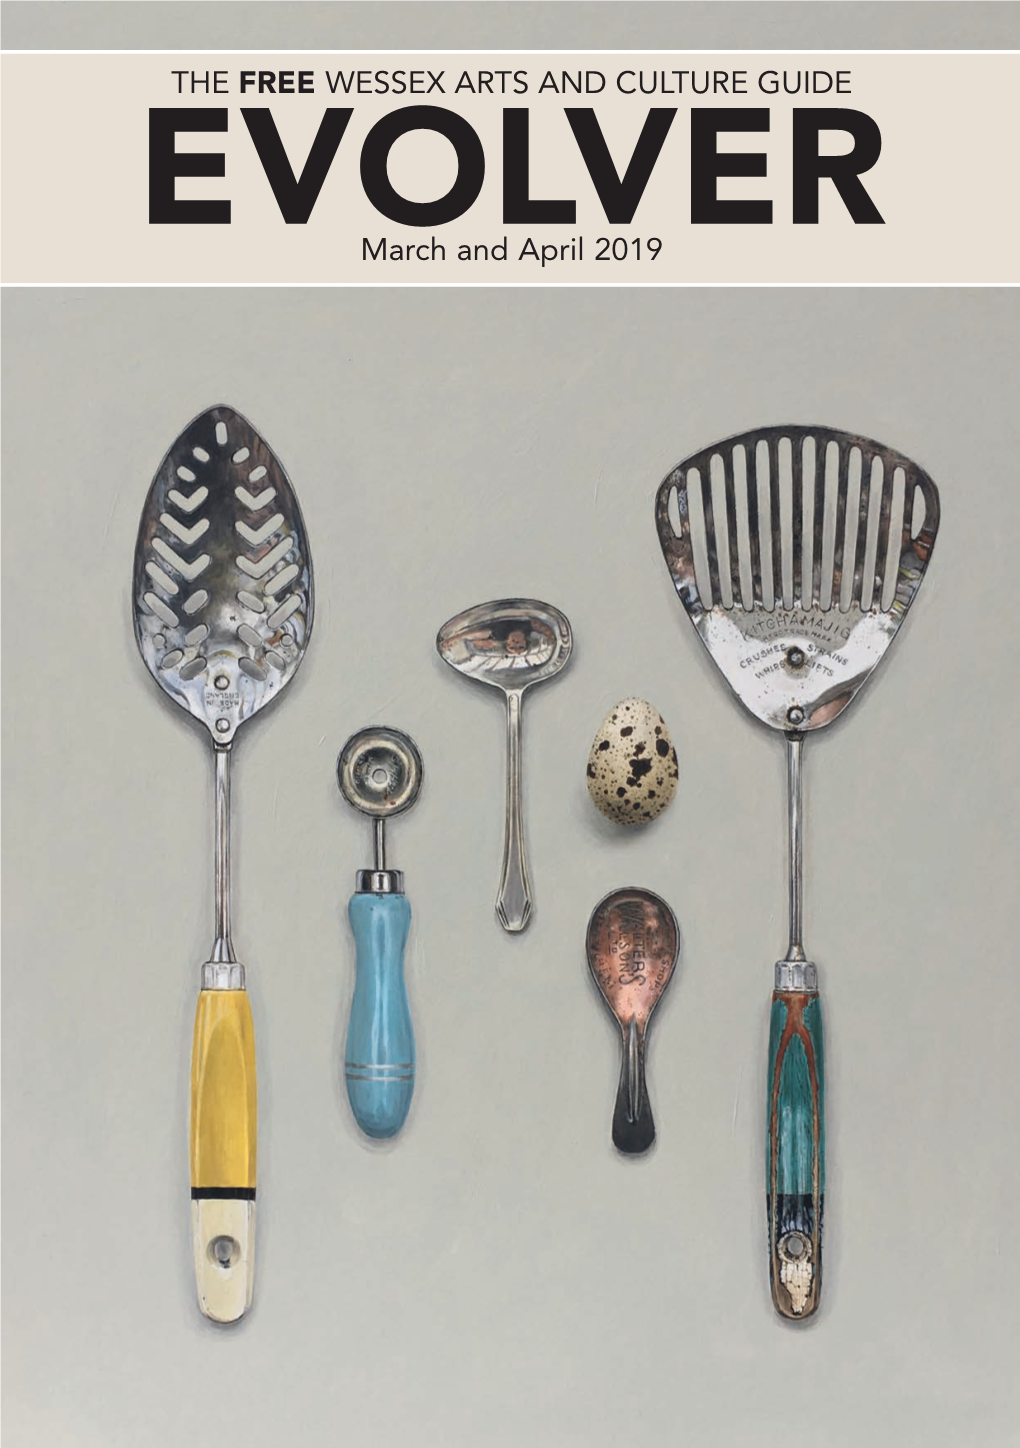 THE FREE WESSEX ARTS and CULTURE GUIDE March and April 2019